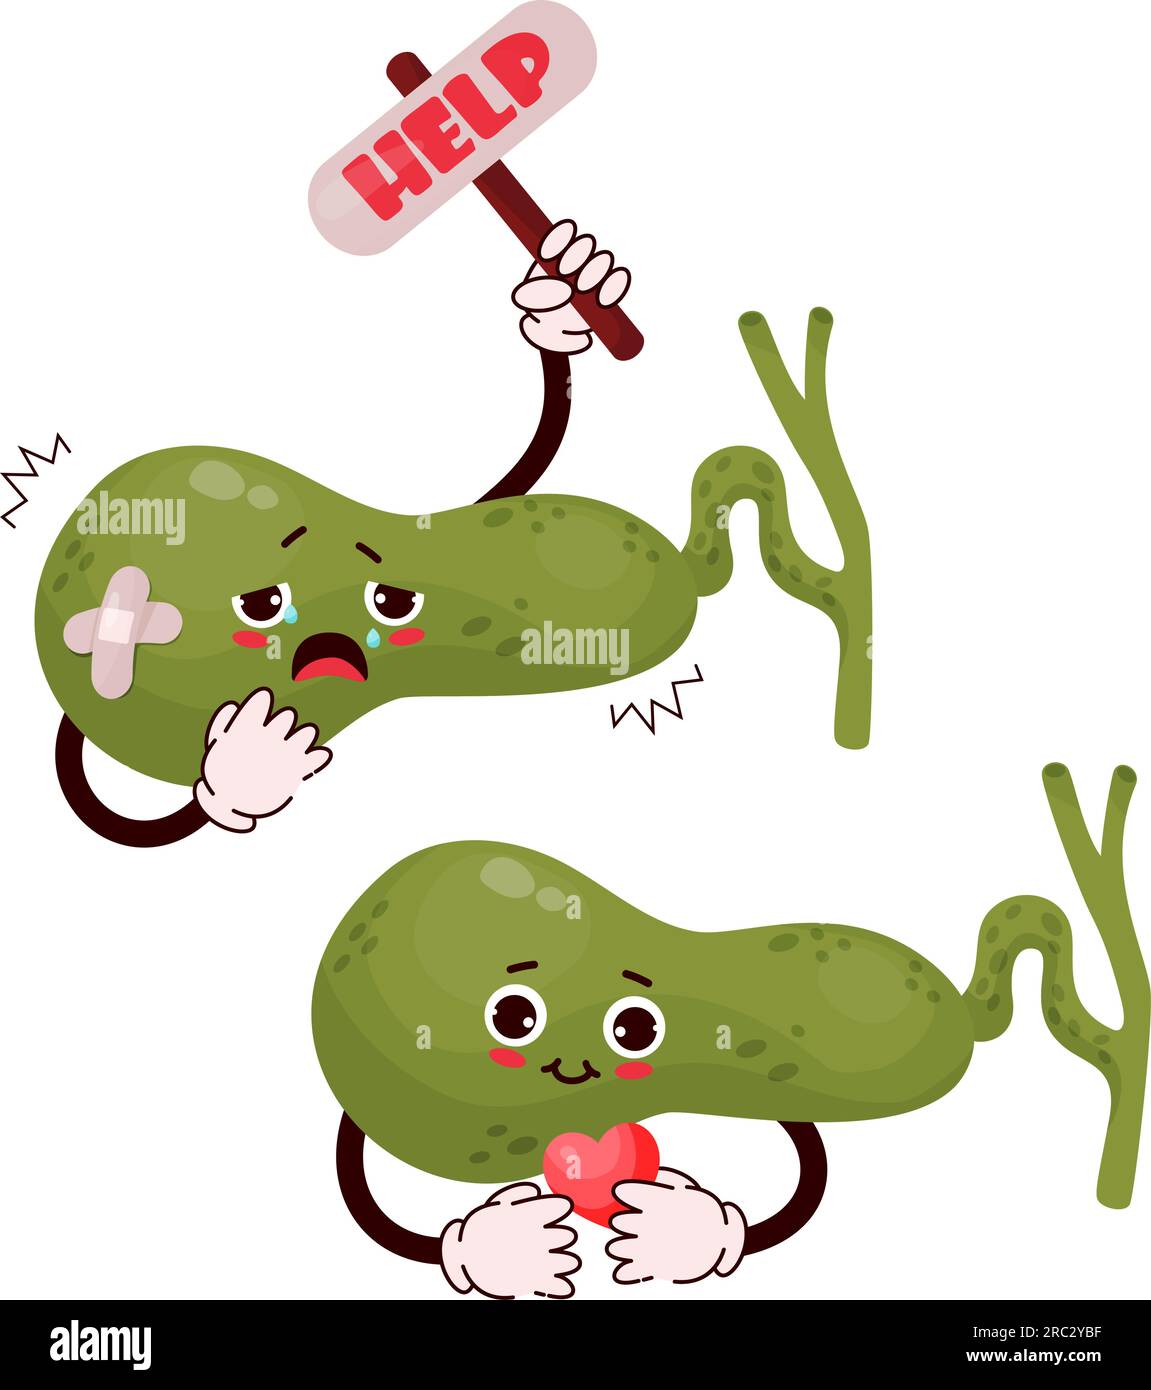 Cute cartoon character gallbladder. Human organ with different emotions. Happy and sad, cries and asks for help. Vector illustration. Concept health Stock Vector